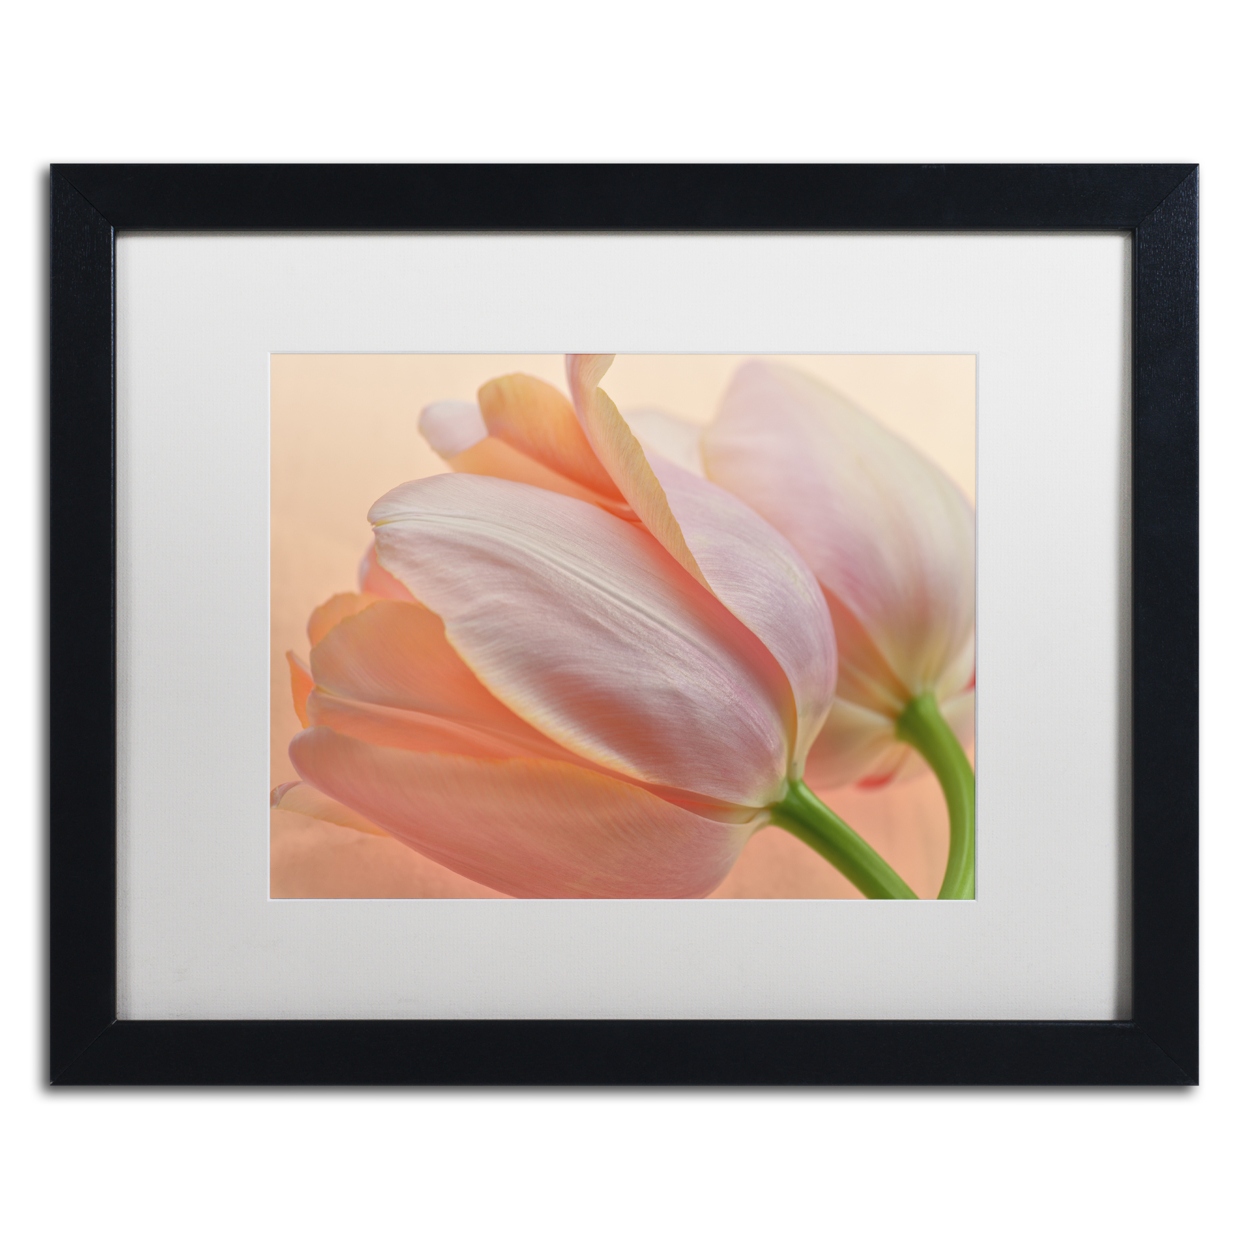 Cora Niele 'Two Orange Tulips' Black Wooden Framed Art 18 X 22 Inches